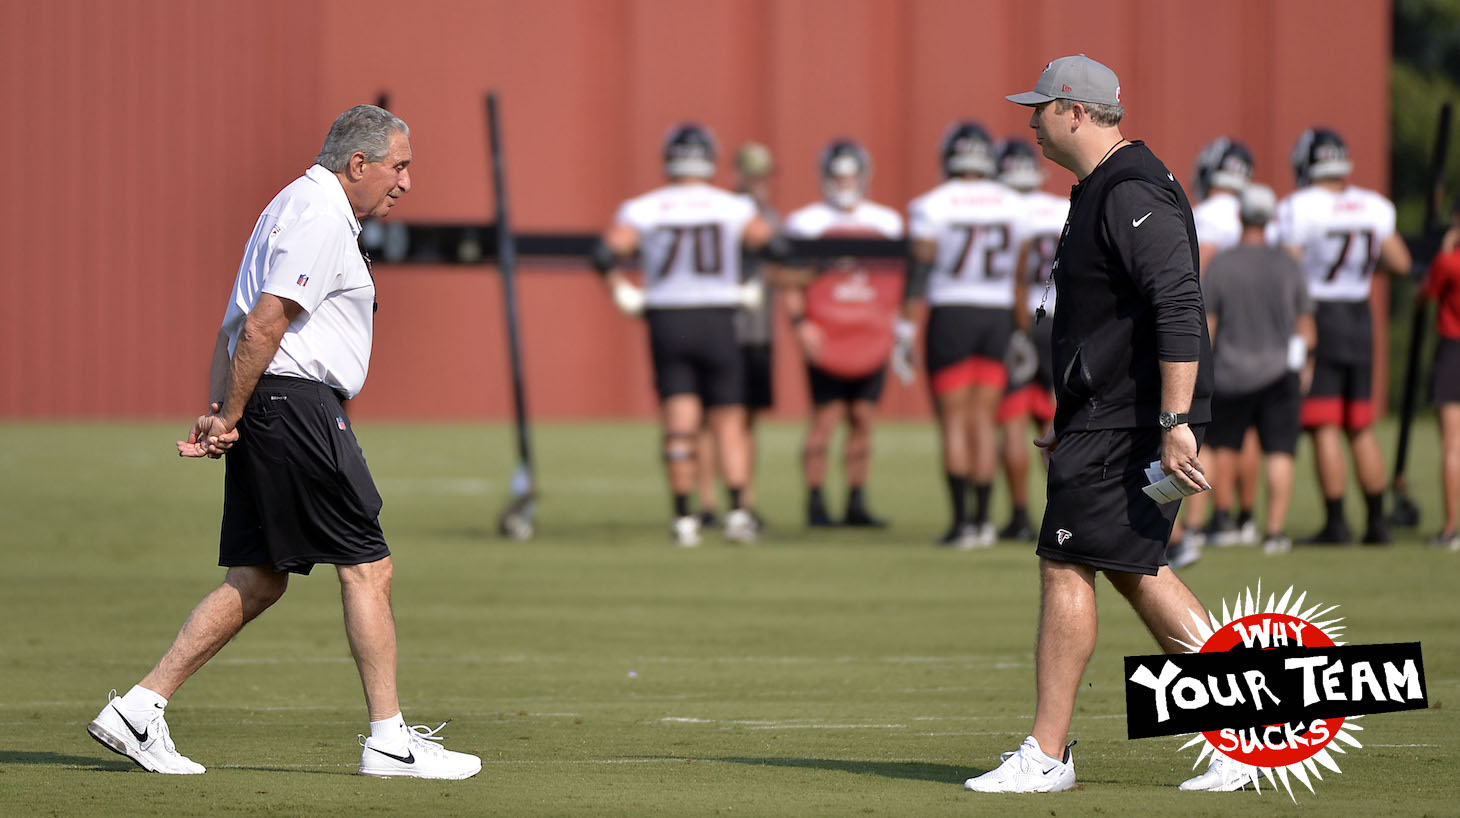 FLOWERY BRANCH, GA - JULY 29: Team owner Arthur Blank (l) of the Atlanta Falcons walks toward Head Coach Arthur Smith on the first day of training camp at IBM Performance Field on July 29, 2021 in Flowery Branch, Georgia. (Photo by Edward M. Pio Roda/Getty Images)